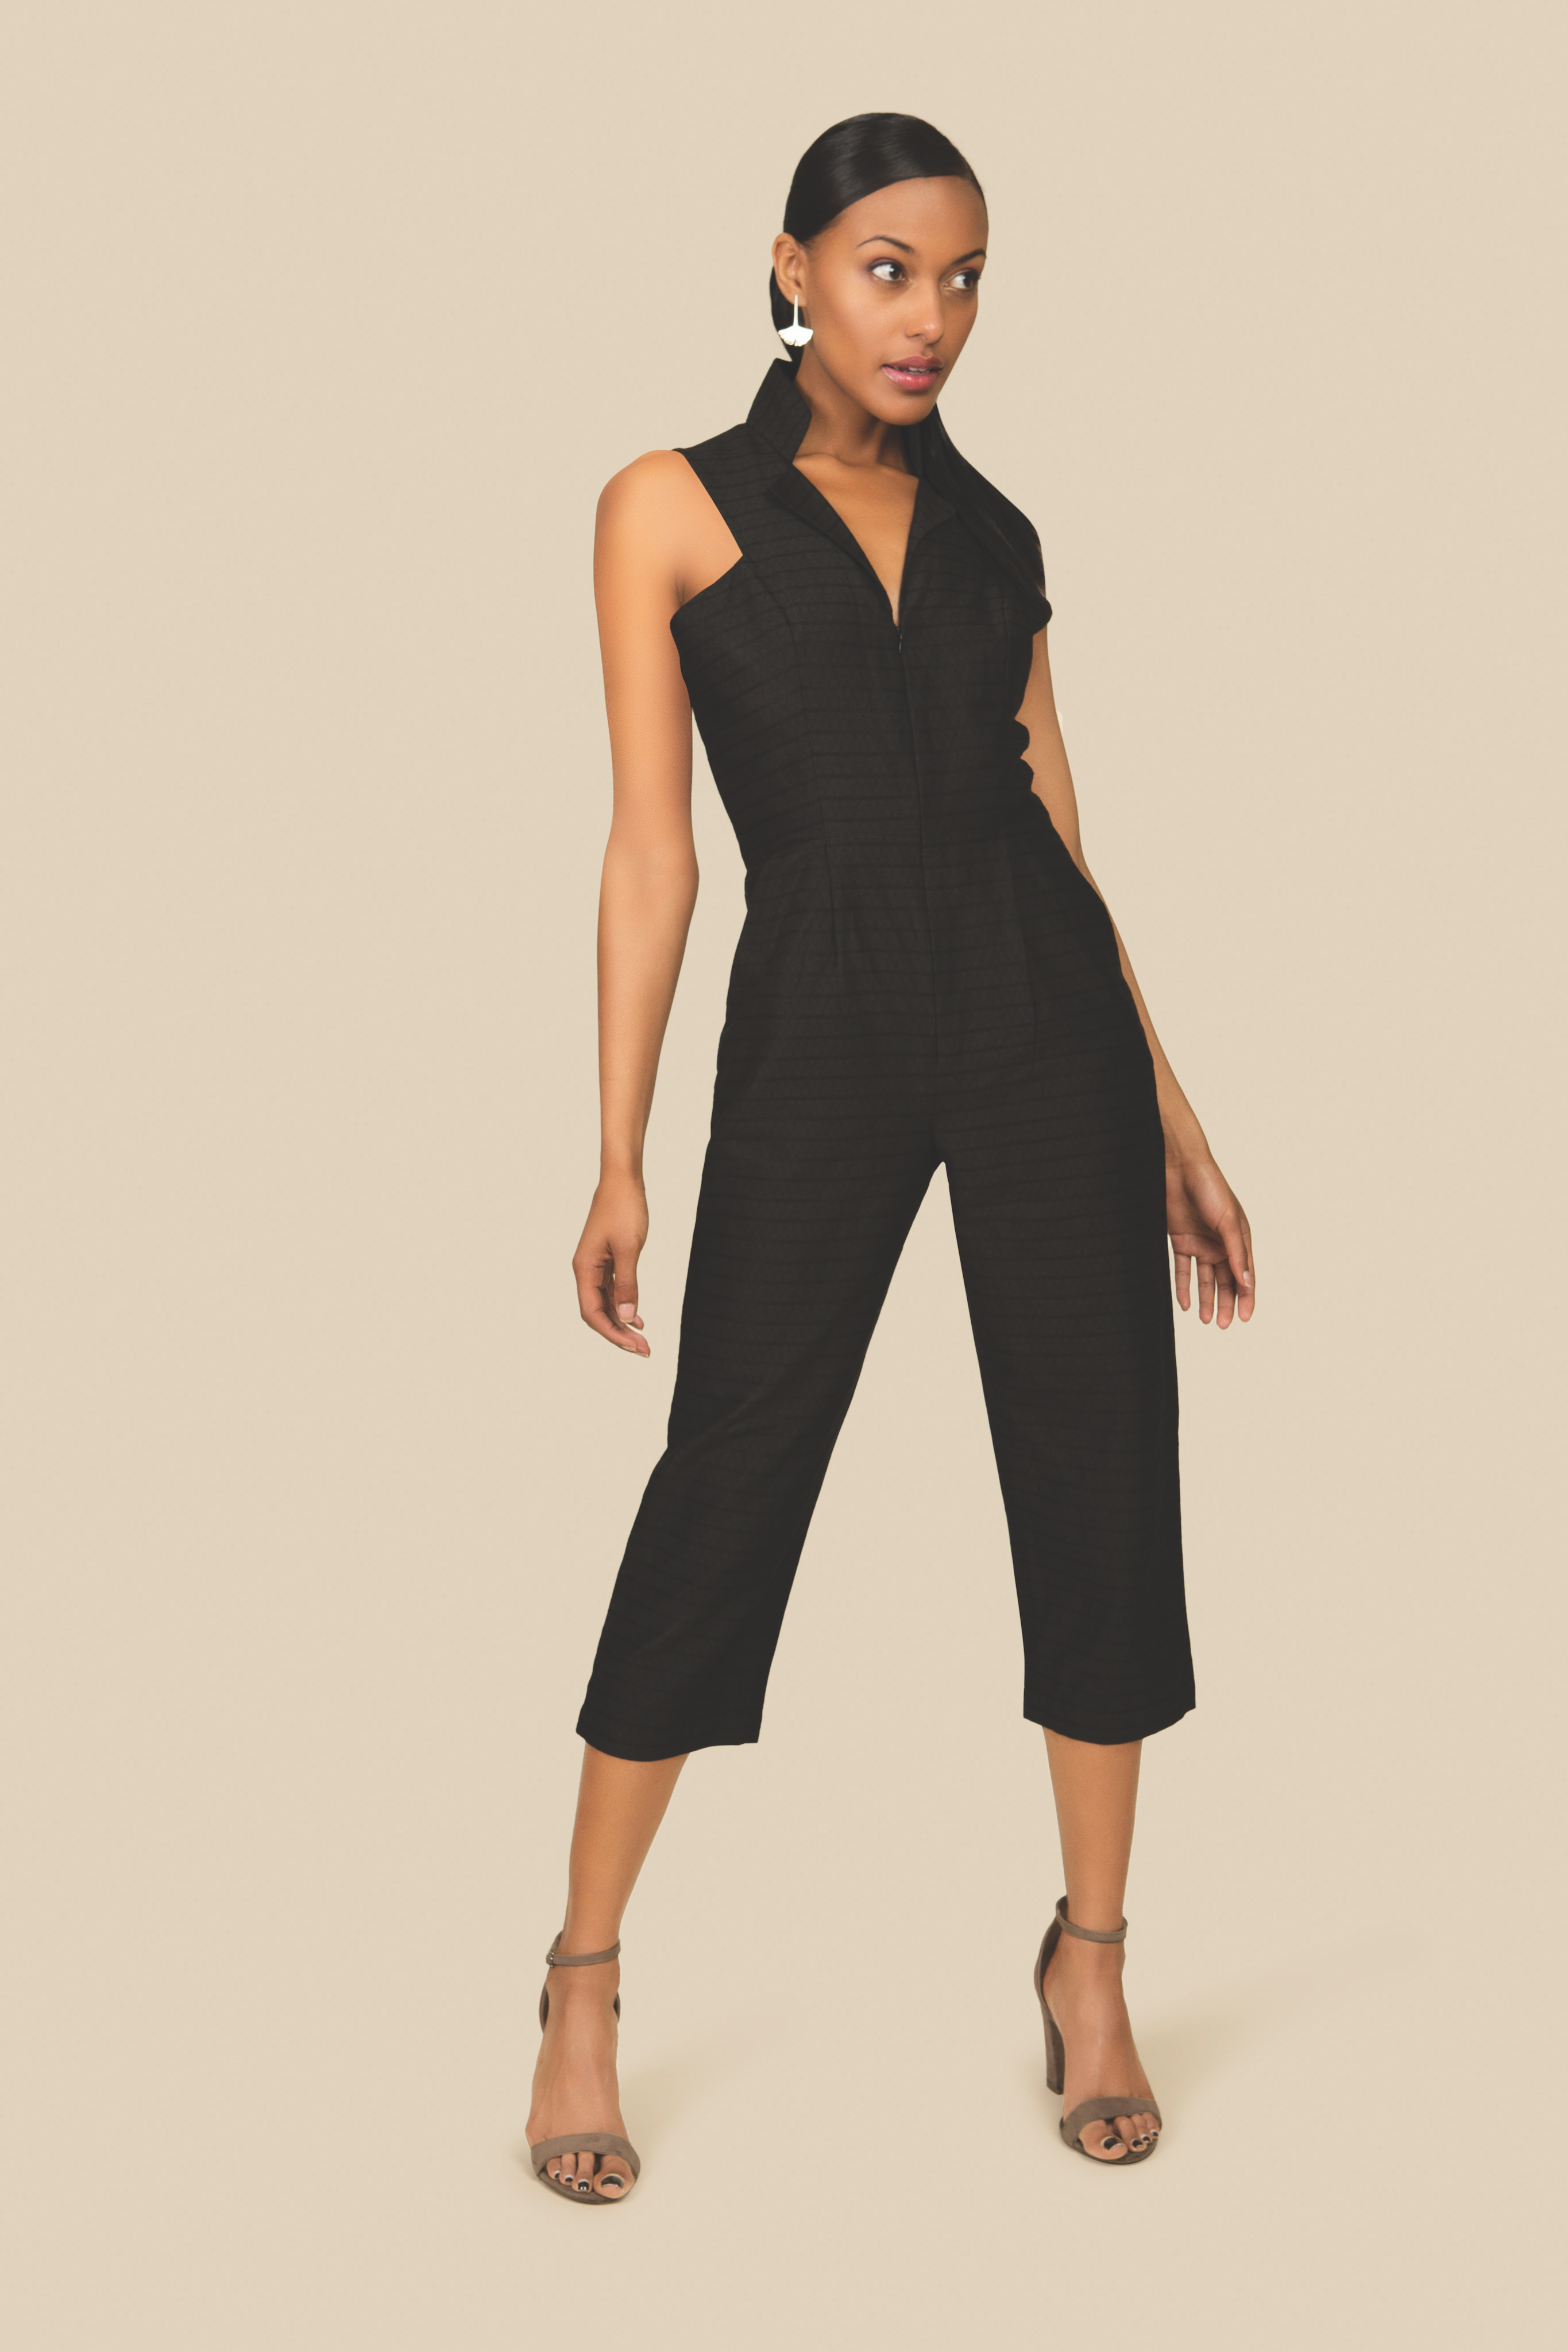 All Day Black Cotton Jumpsuit with Front Zipper